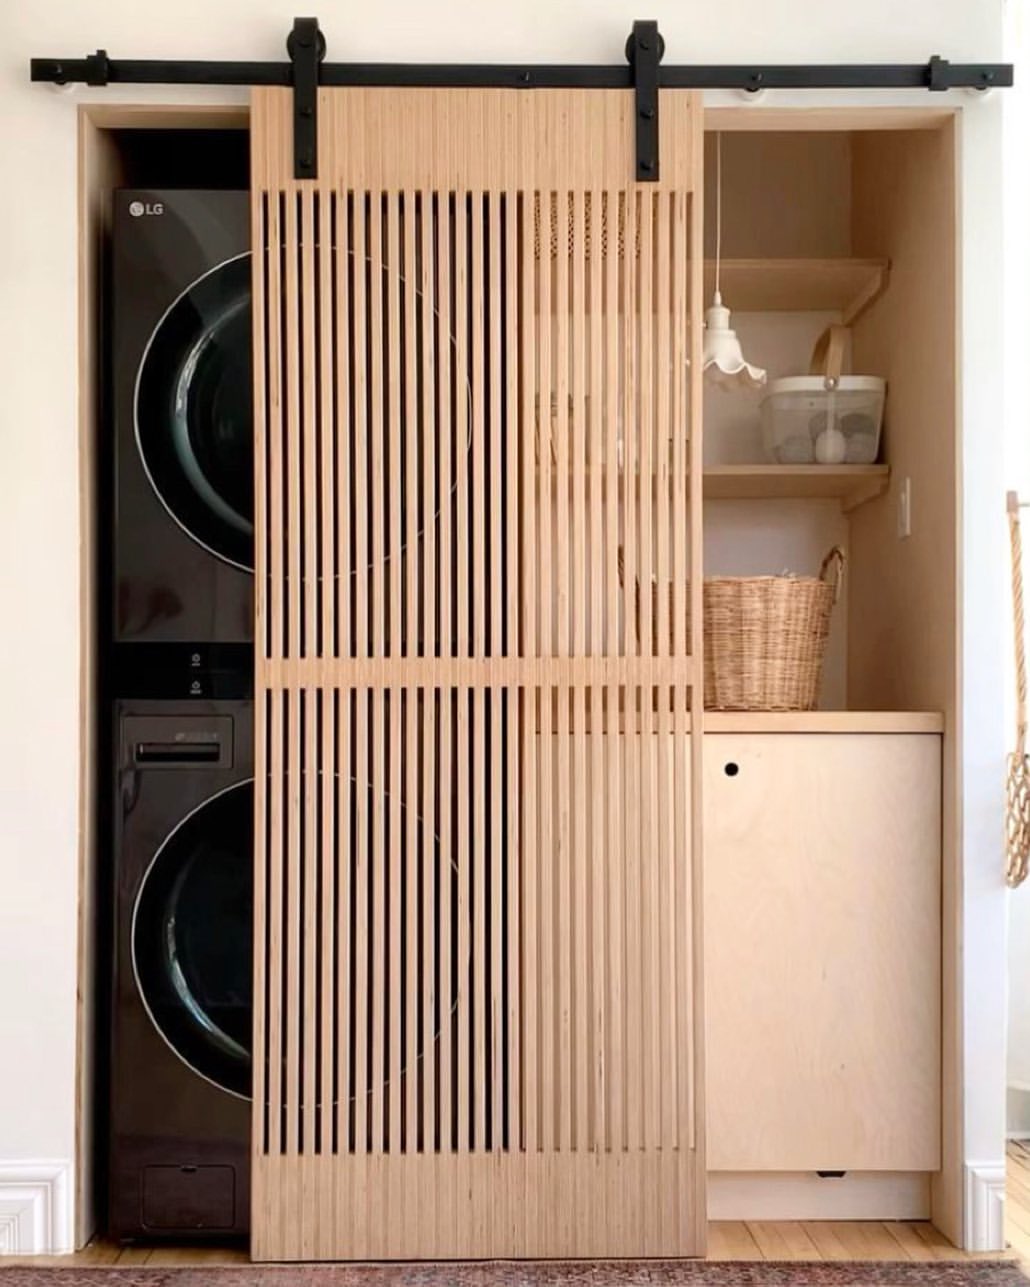 Minimalist Sliding Barn Door Laundry Room With A Stacked Washer Dryer